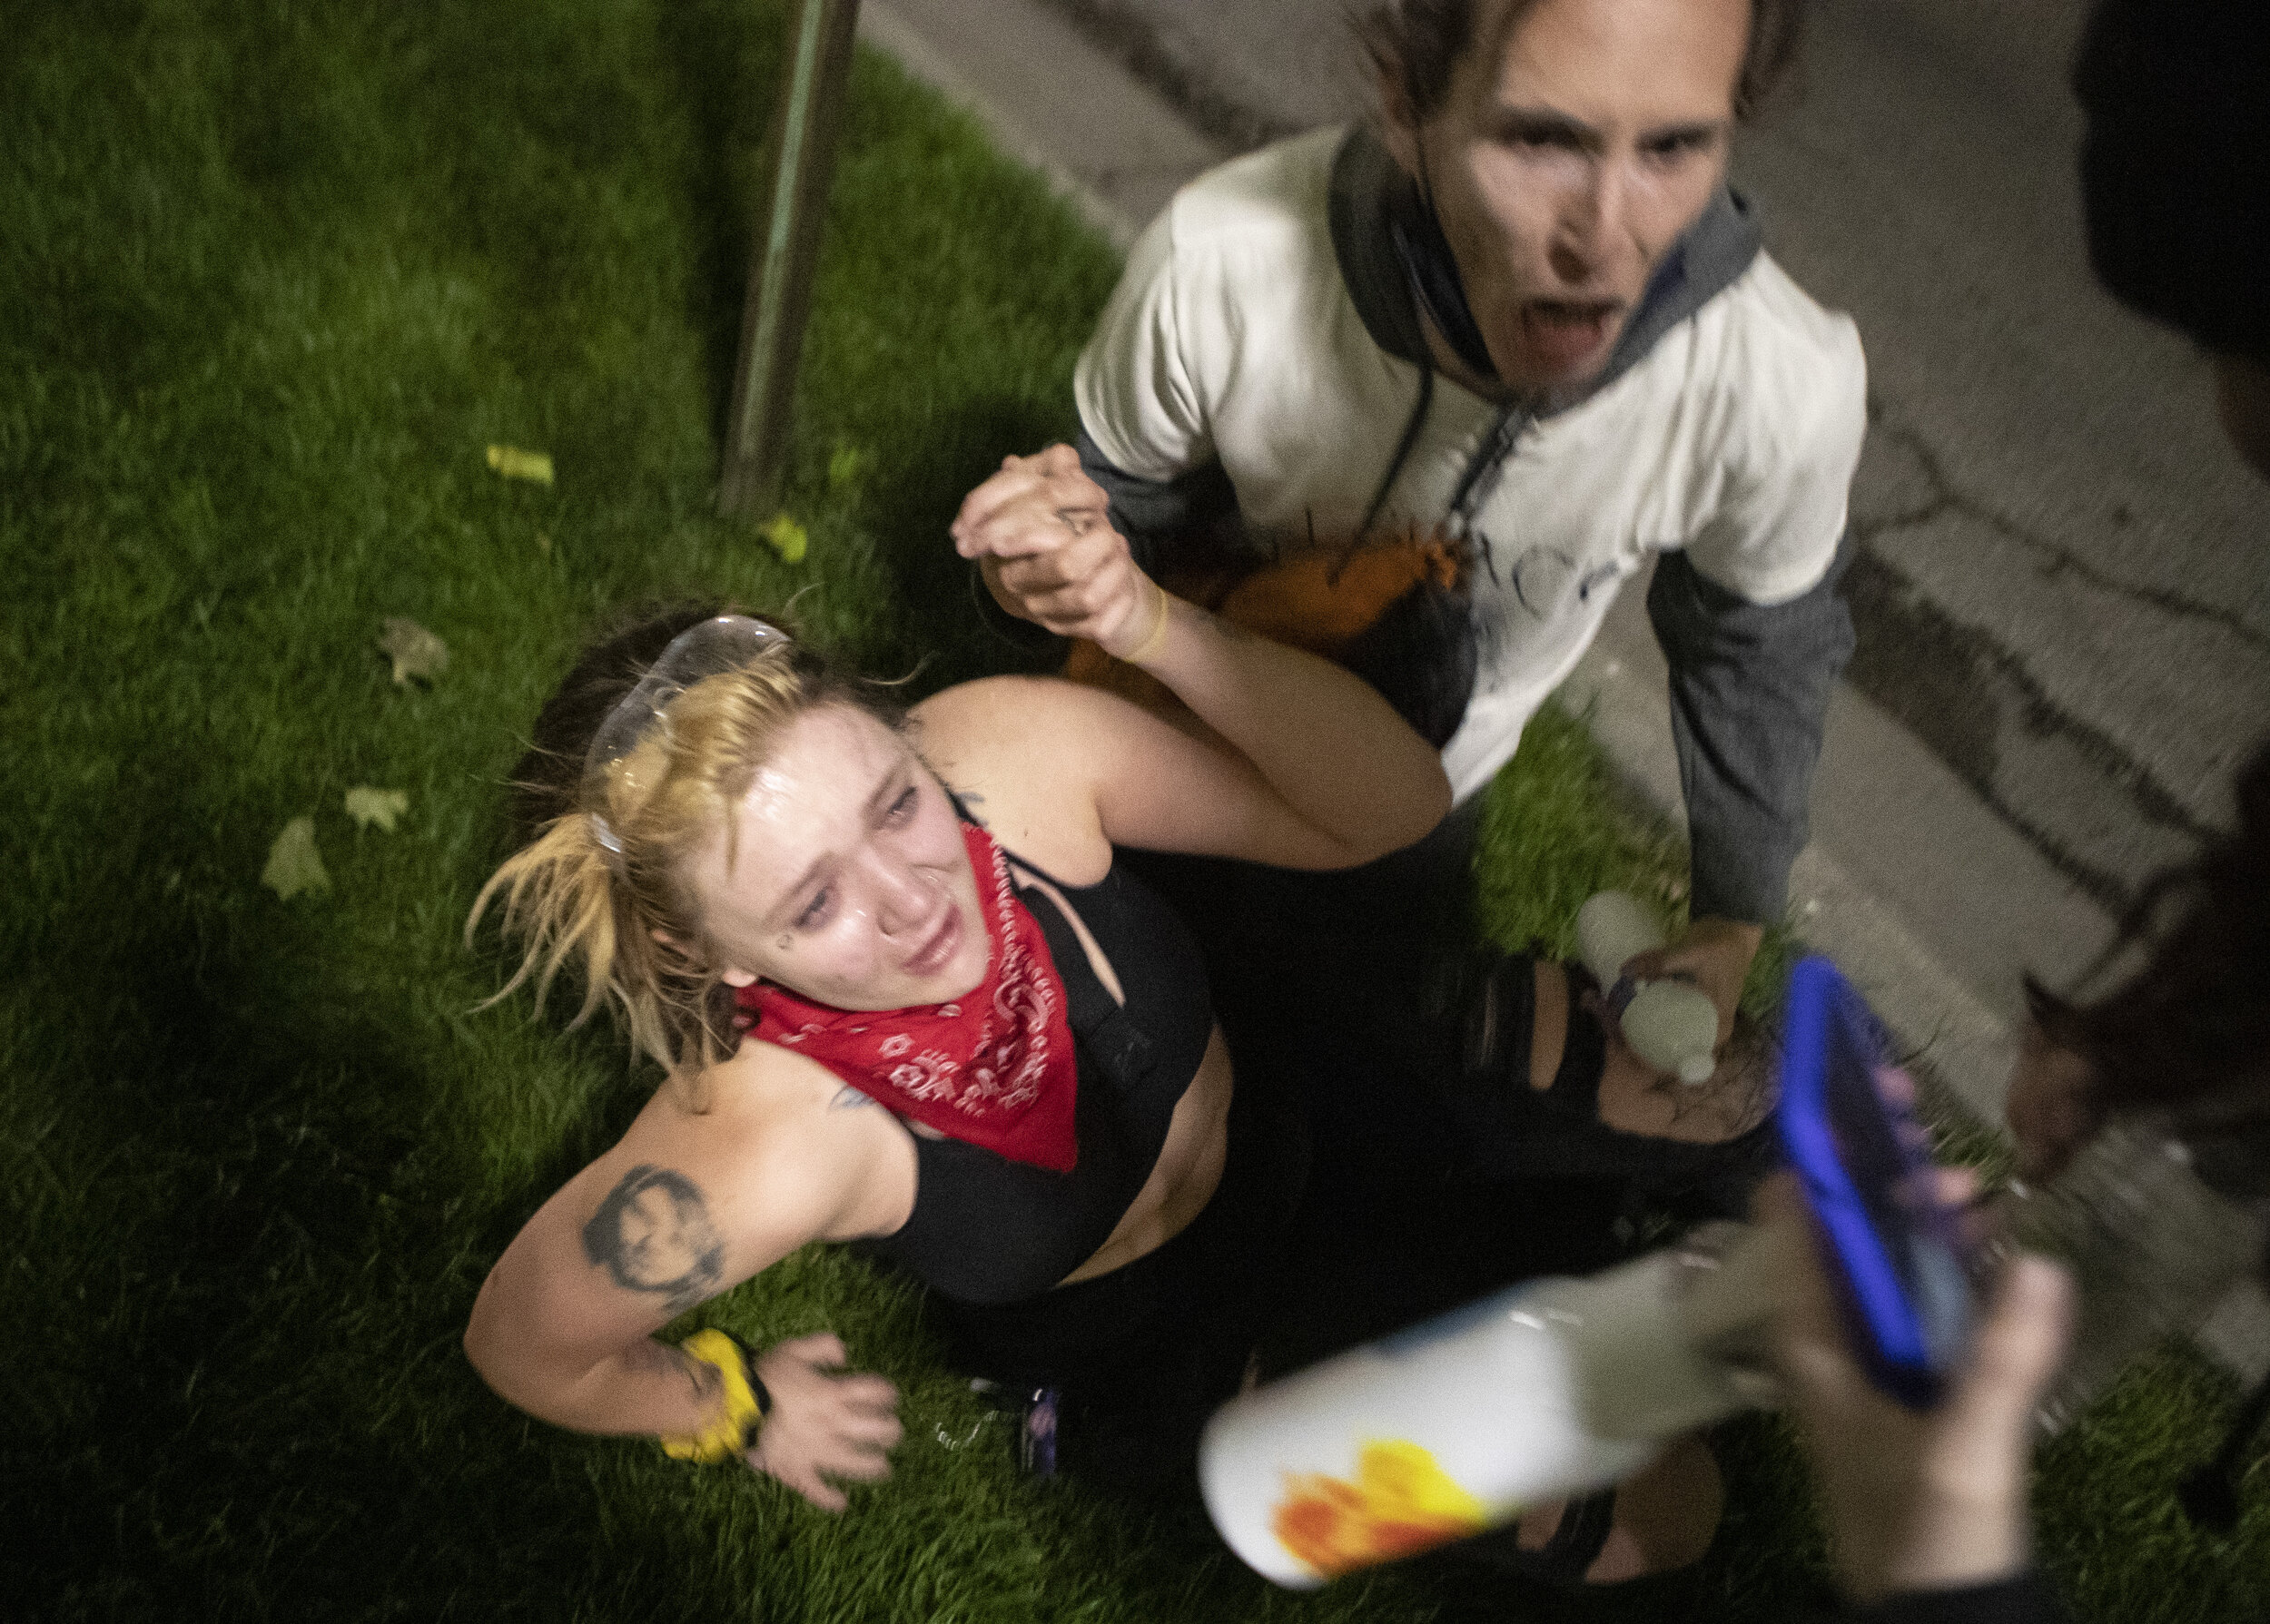  A protester calls for help after their partner was incapacitated by a rubber bullet and tear gas in the Lincoln mall as the second night of peaceful protests against police brutality suddenly turned violent late Saturday night on  May 30, 2020, in L